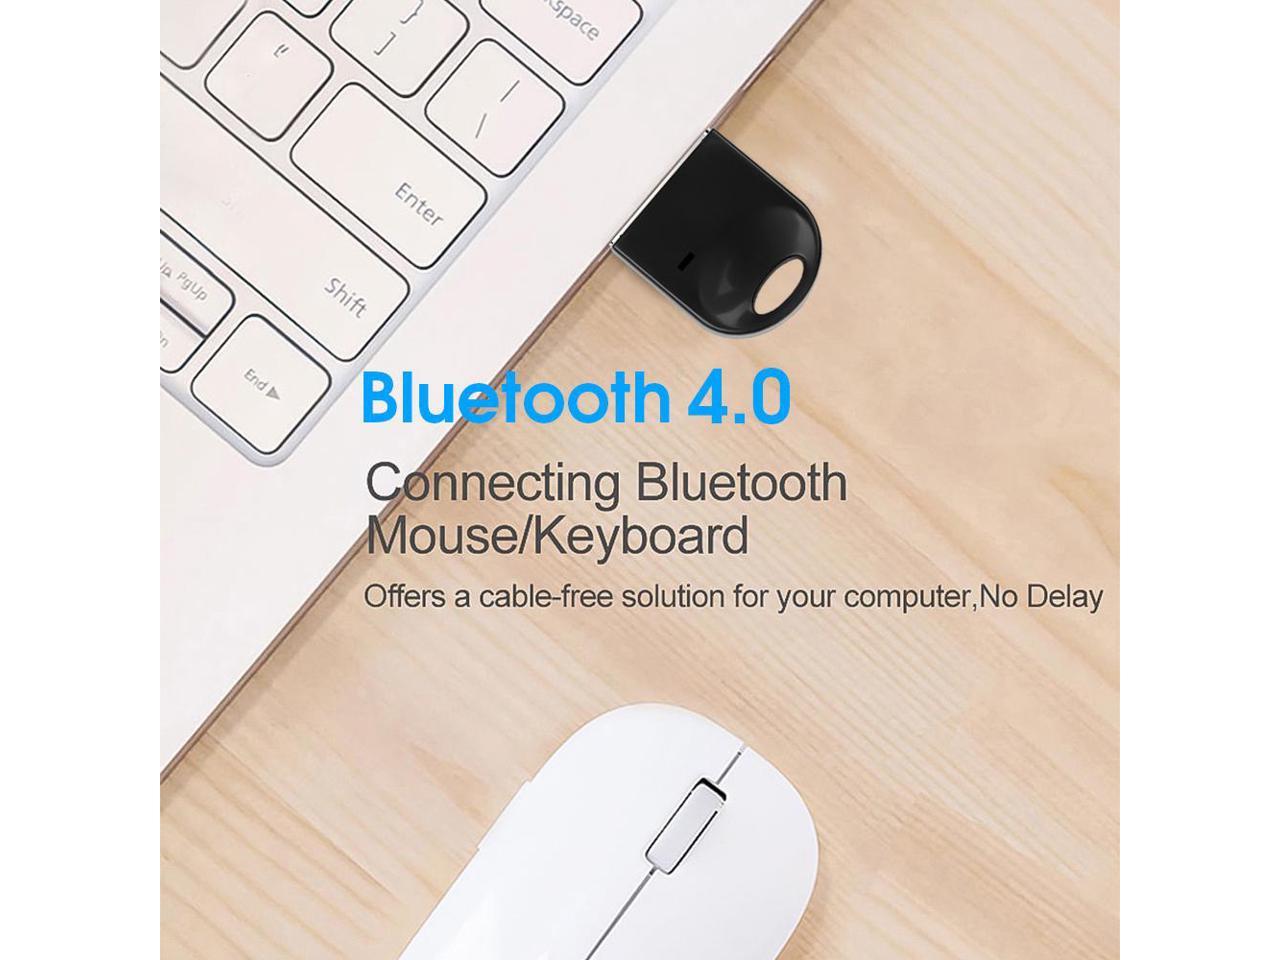 bluetooth csr 4.0 dongle ps4 controller